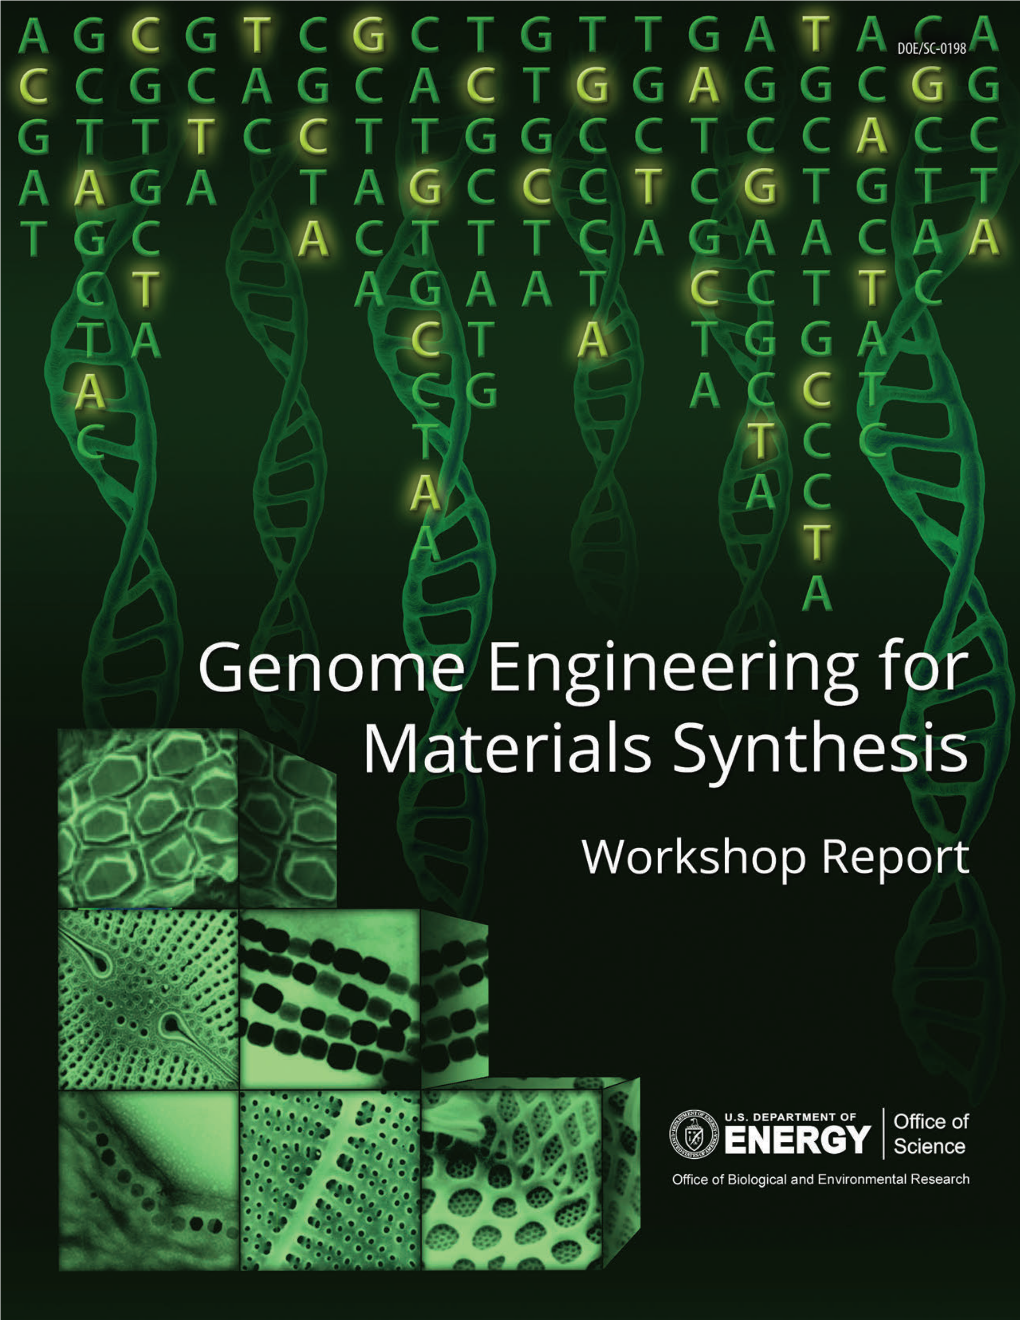 Genome Engineering for Materials Synthesis 2019